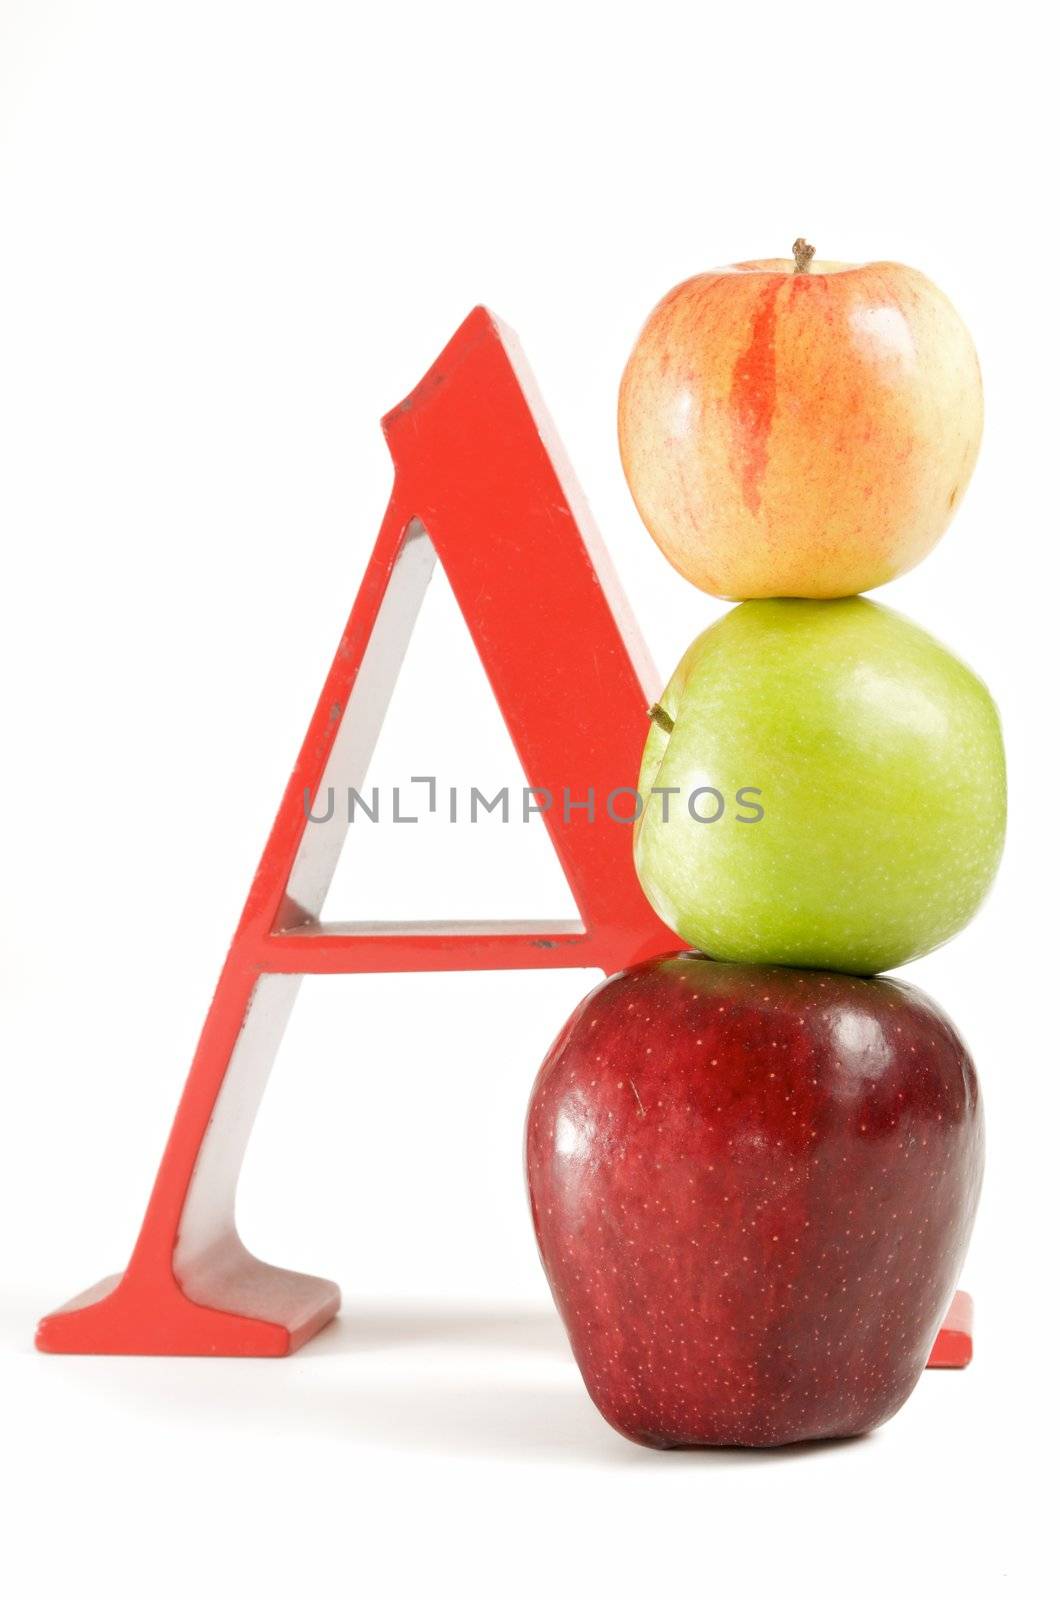 A is for Apple by achauer